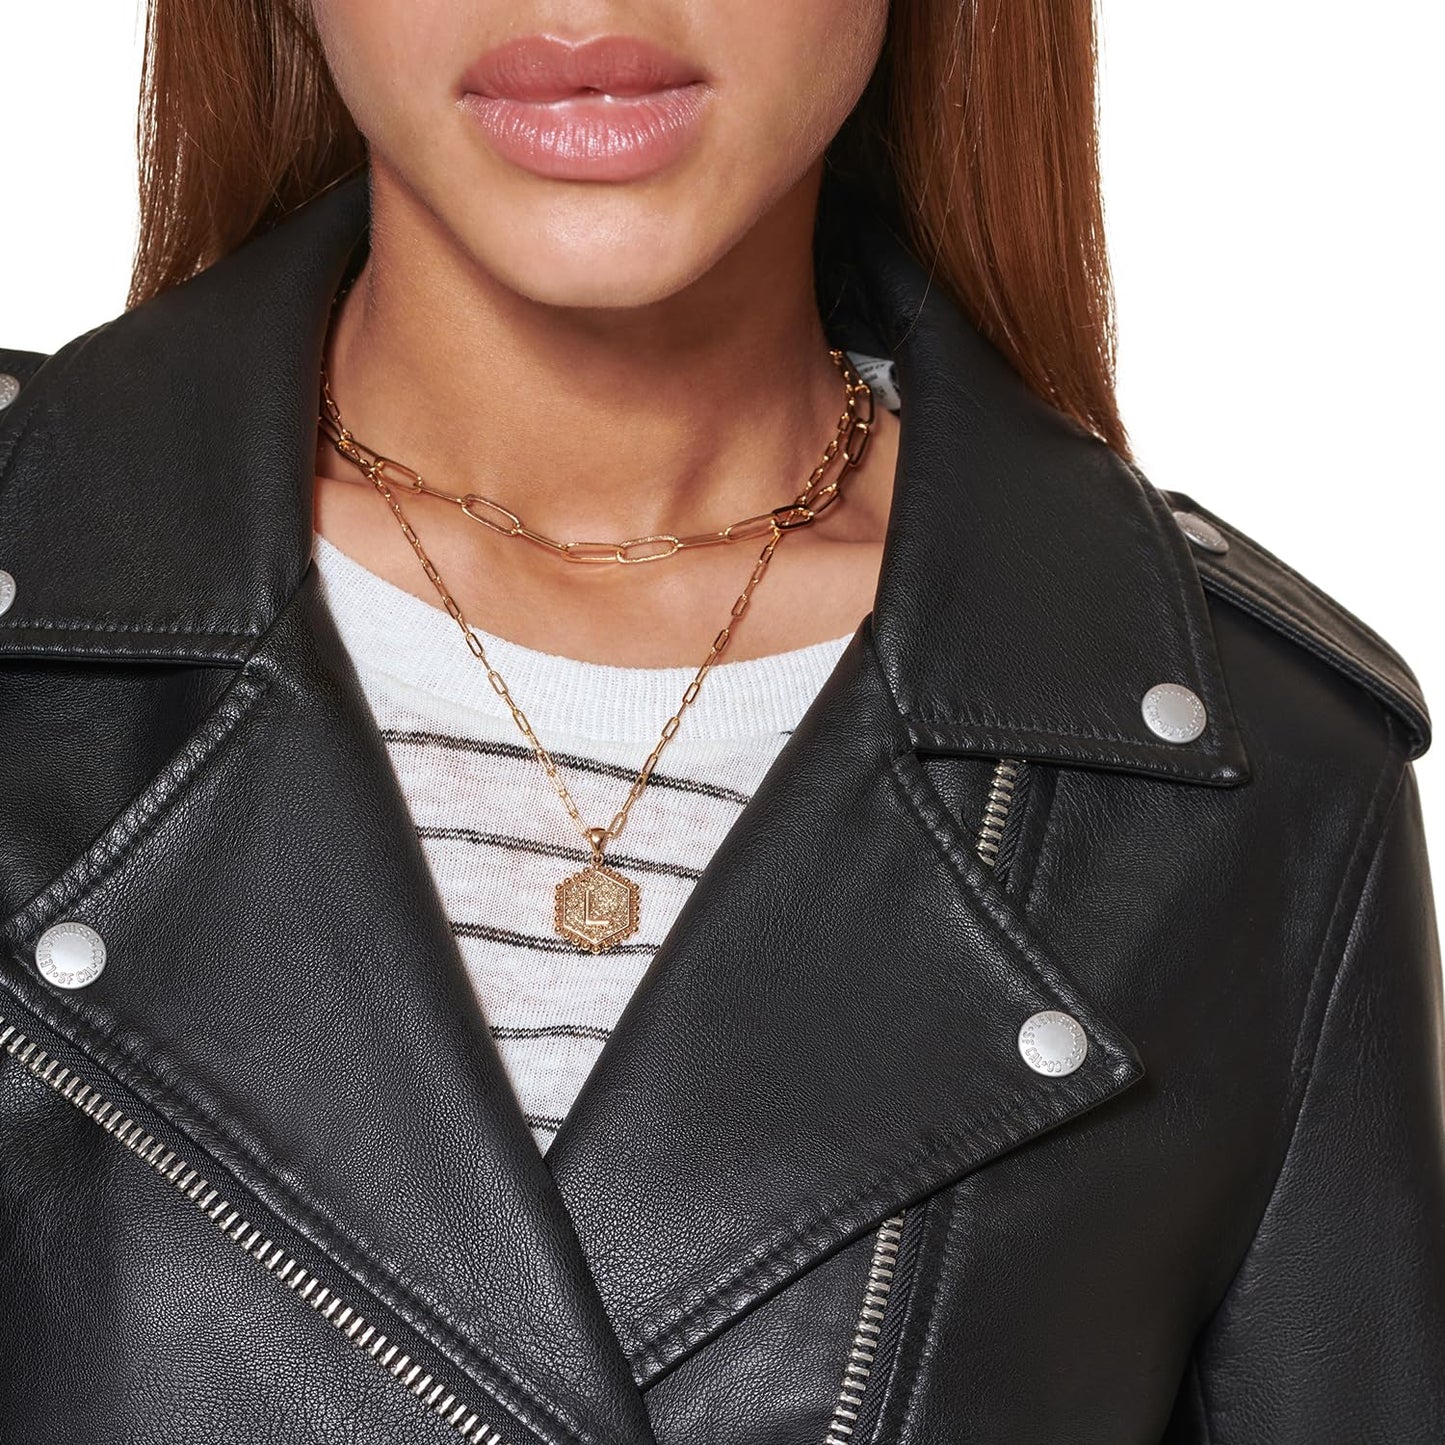 Apparel-Levi's Women Faux Leather Belted Motorcycle Jacket (Standard and Plus Sizes)